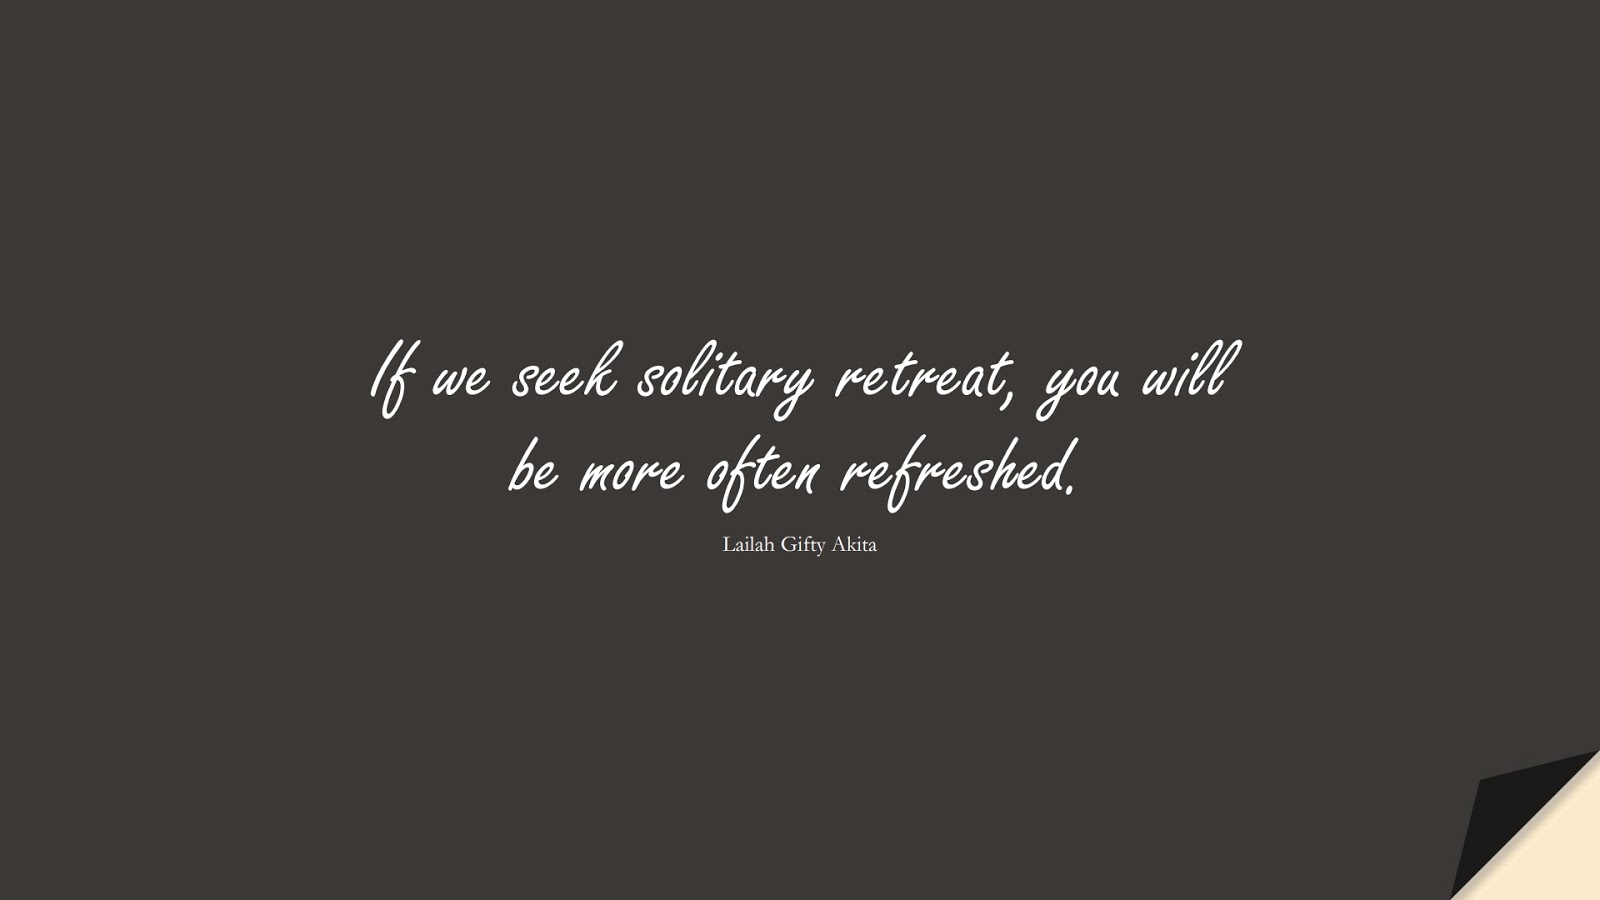 If we seek solitary retreat, you will be more often refreshed. (Lailah Gifty Akita);  #HealthQuotes